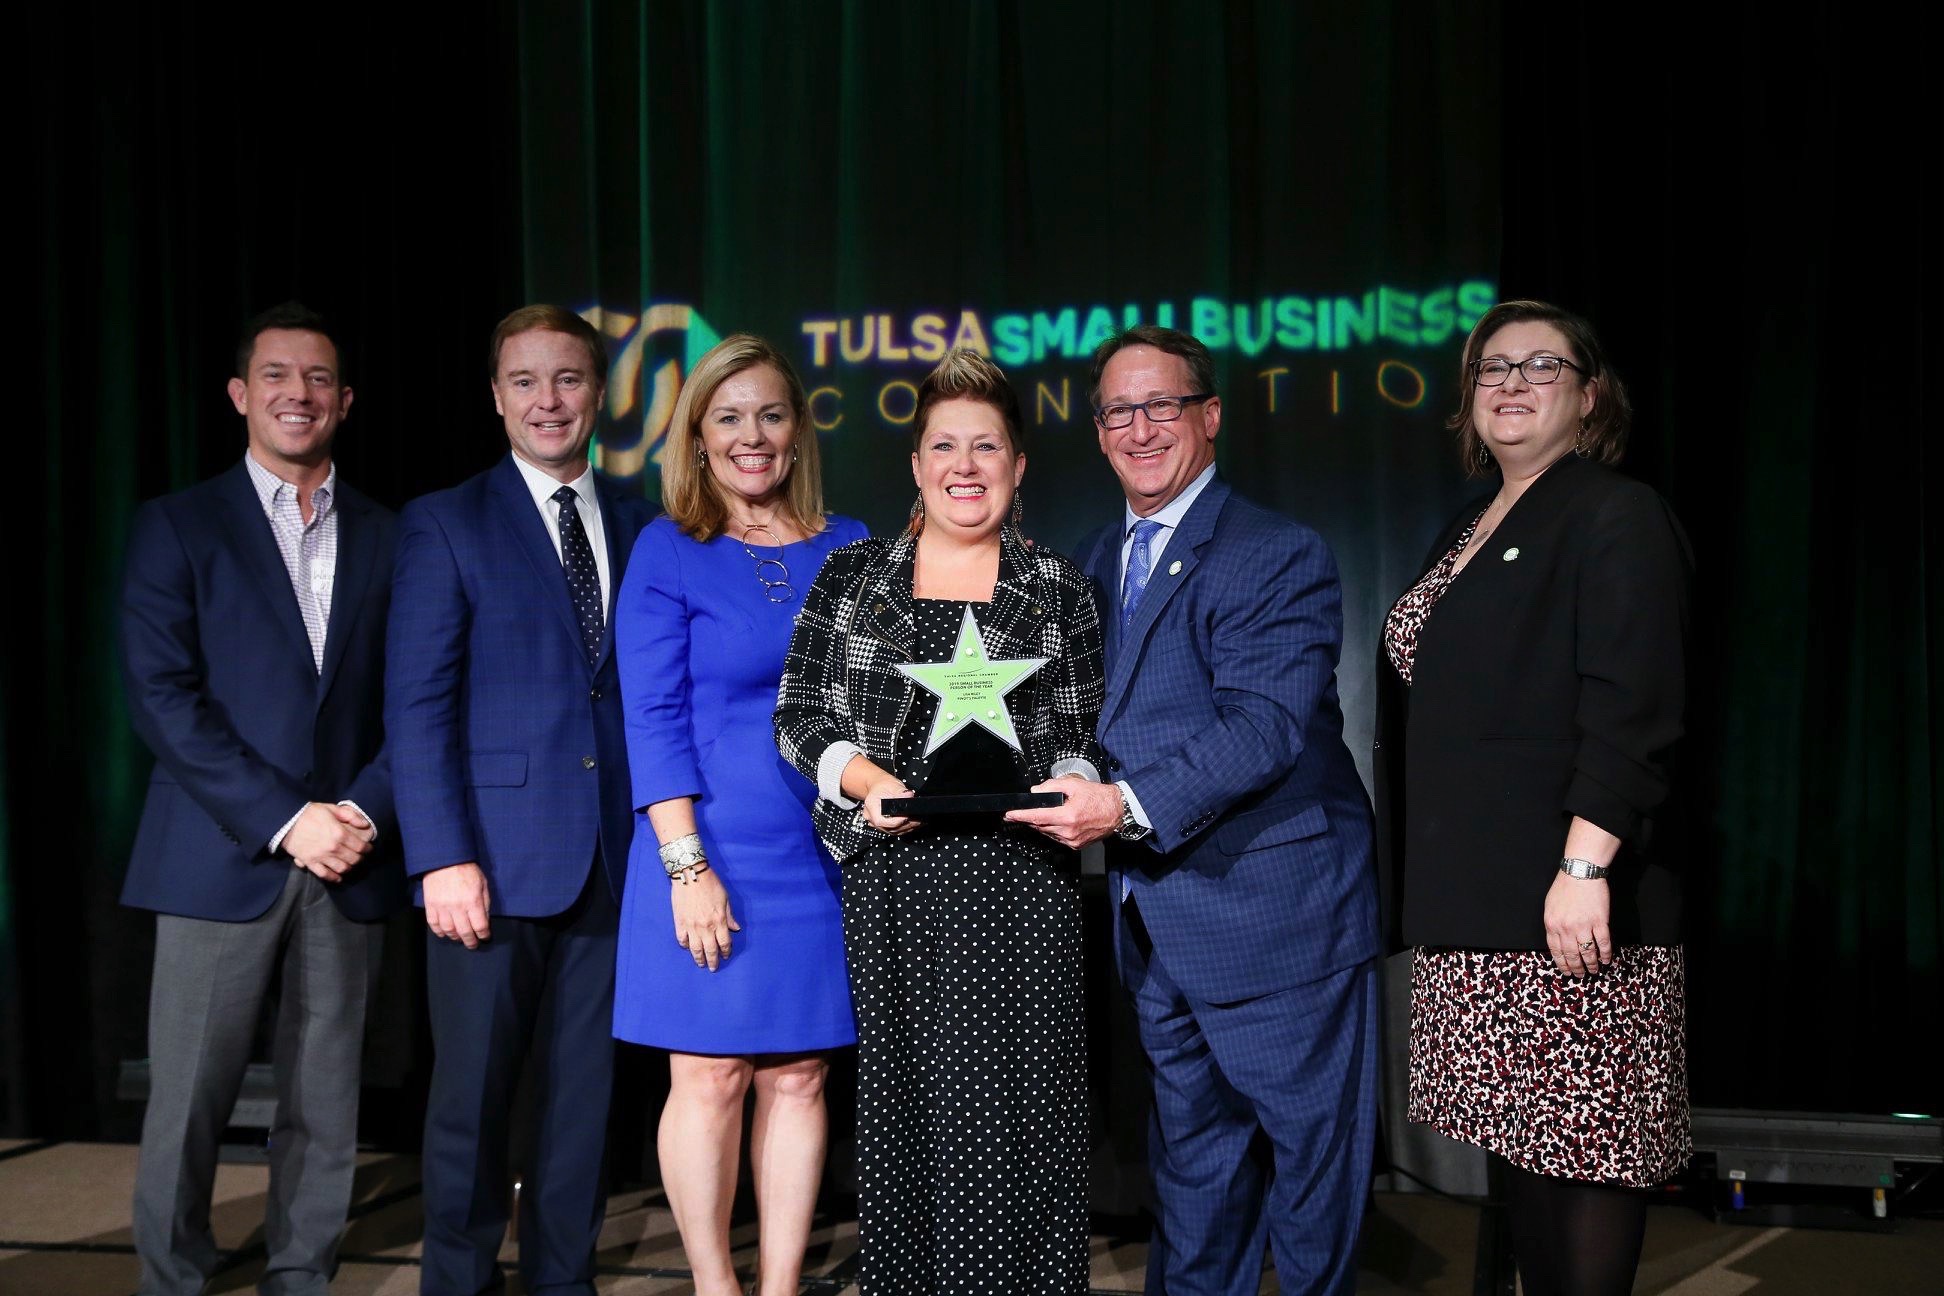 Tulsa Area Paint and Sip Owner named 2019 Small Business Person of the Year!